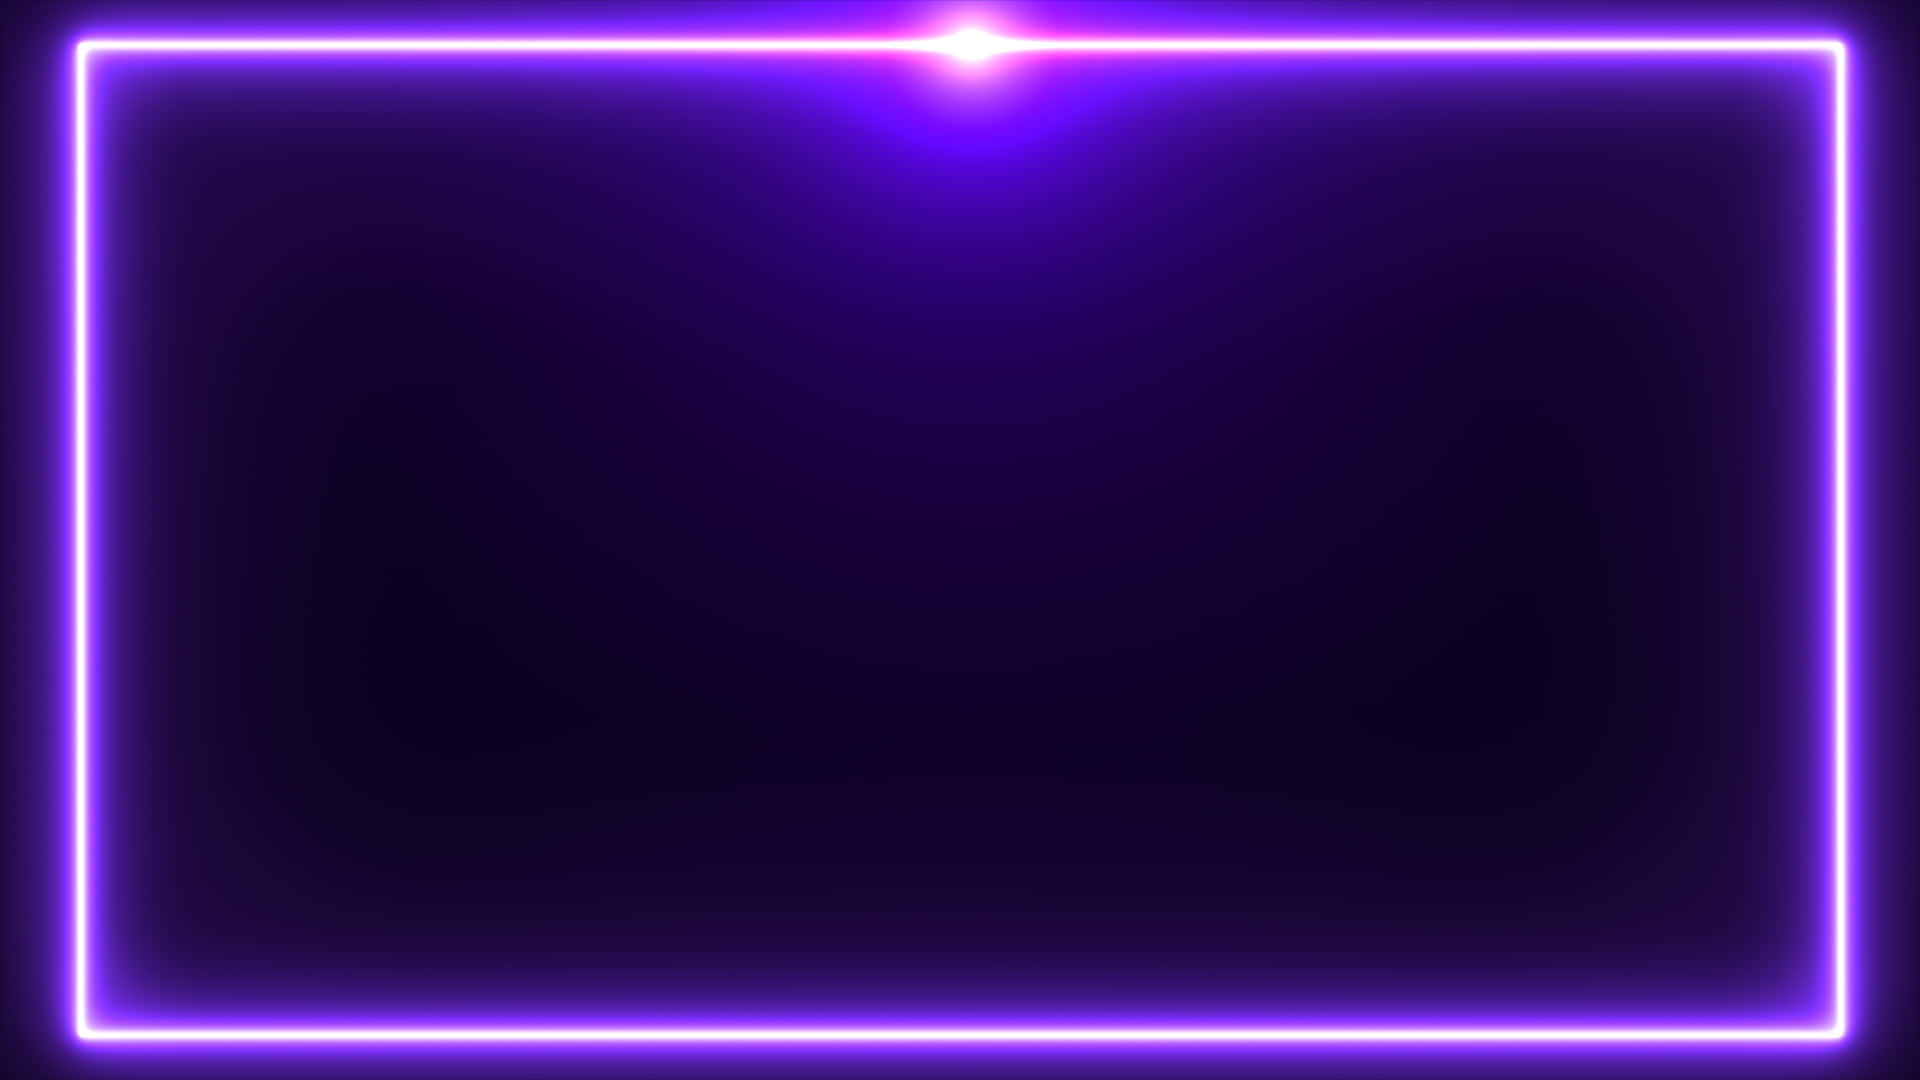 Neon Purple -  Liven Up Your Room with This Vibrant Neon Purple Background